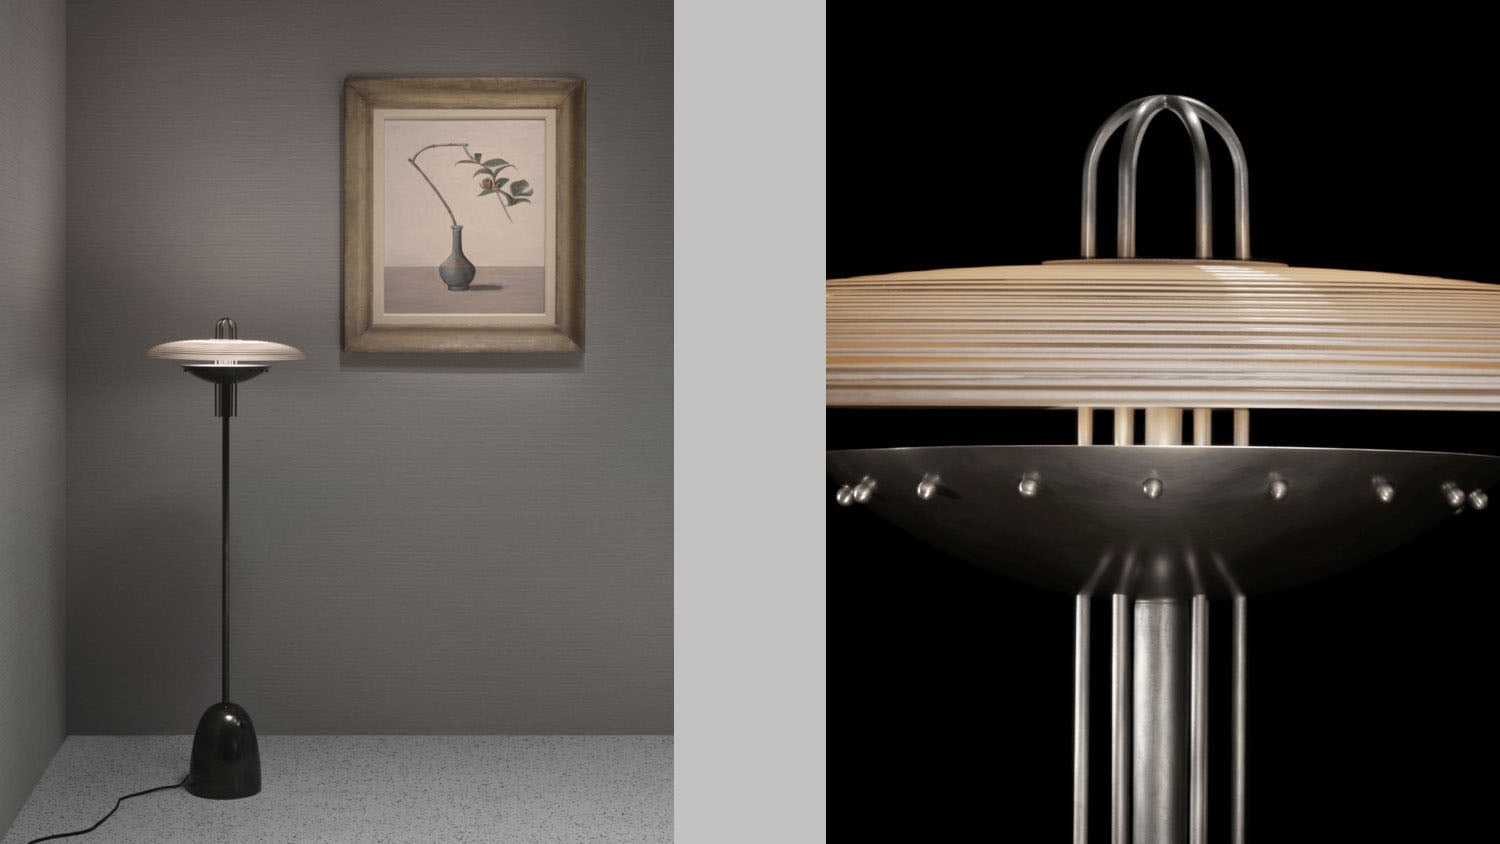 A SIGNAL : Y floor lamp is standing in front of a framed painting, alongside a close up image of a SIGNAL : Y floor lamp showing details of the Tarnished Silver finish and Smoked Glass. 